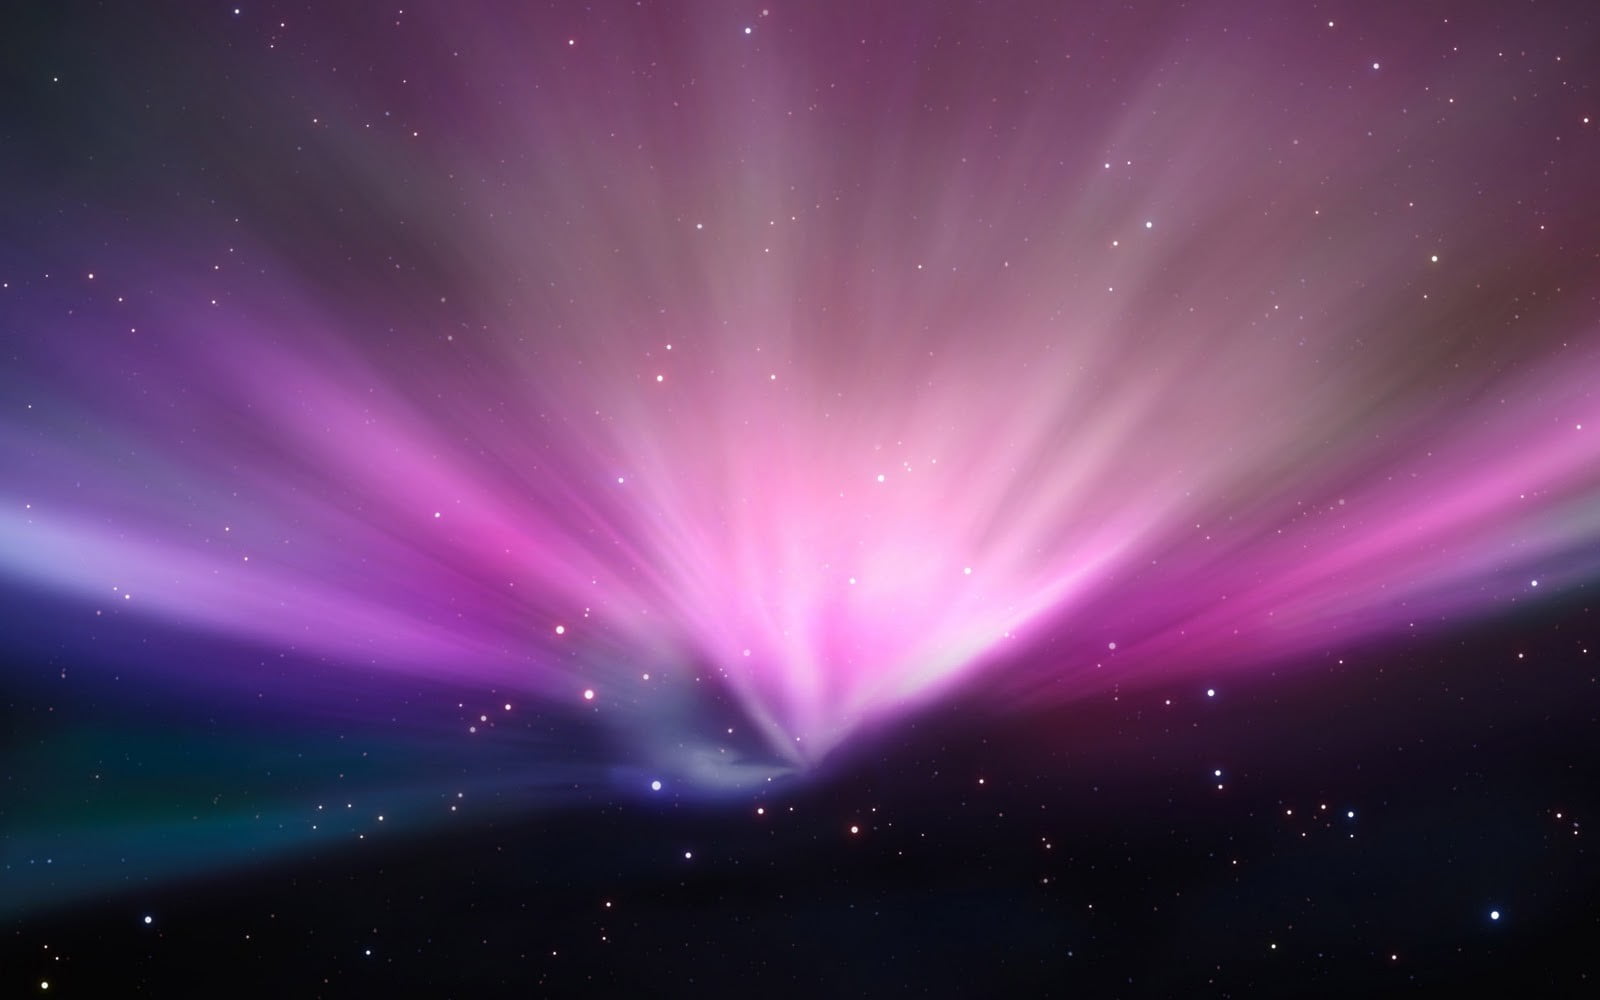 pink-purple-and-blue-light-with-black-background-hd-wallpaper